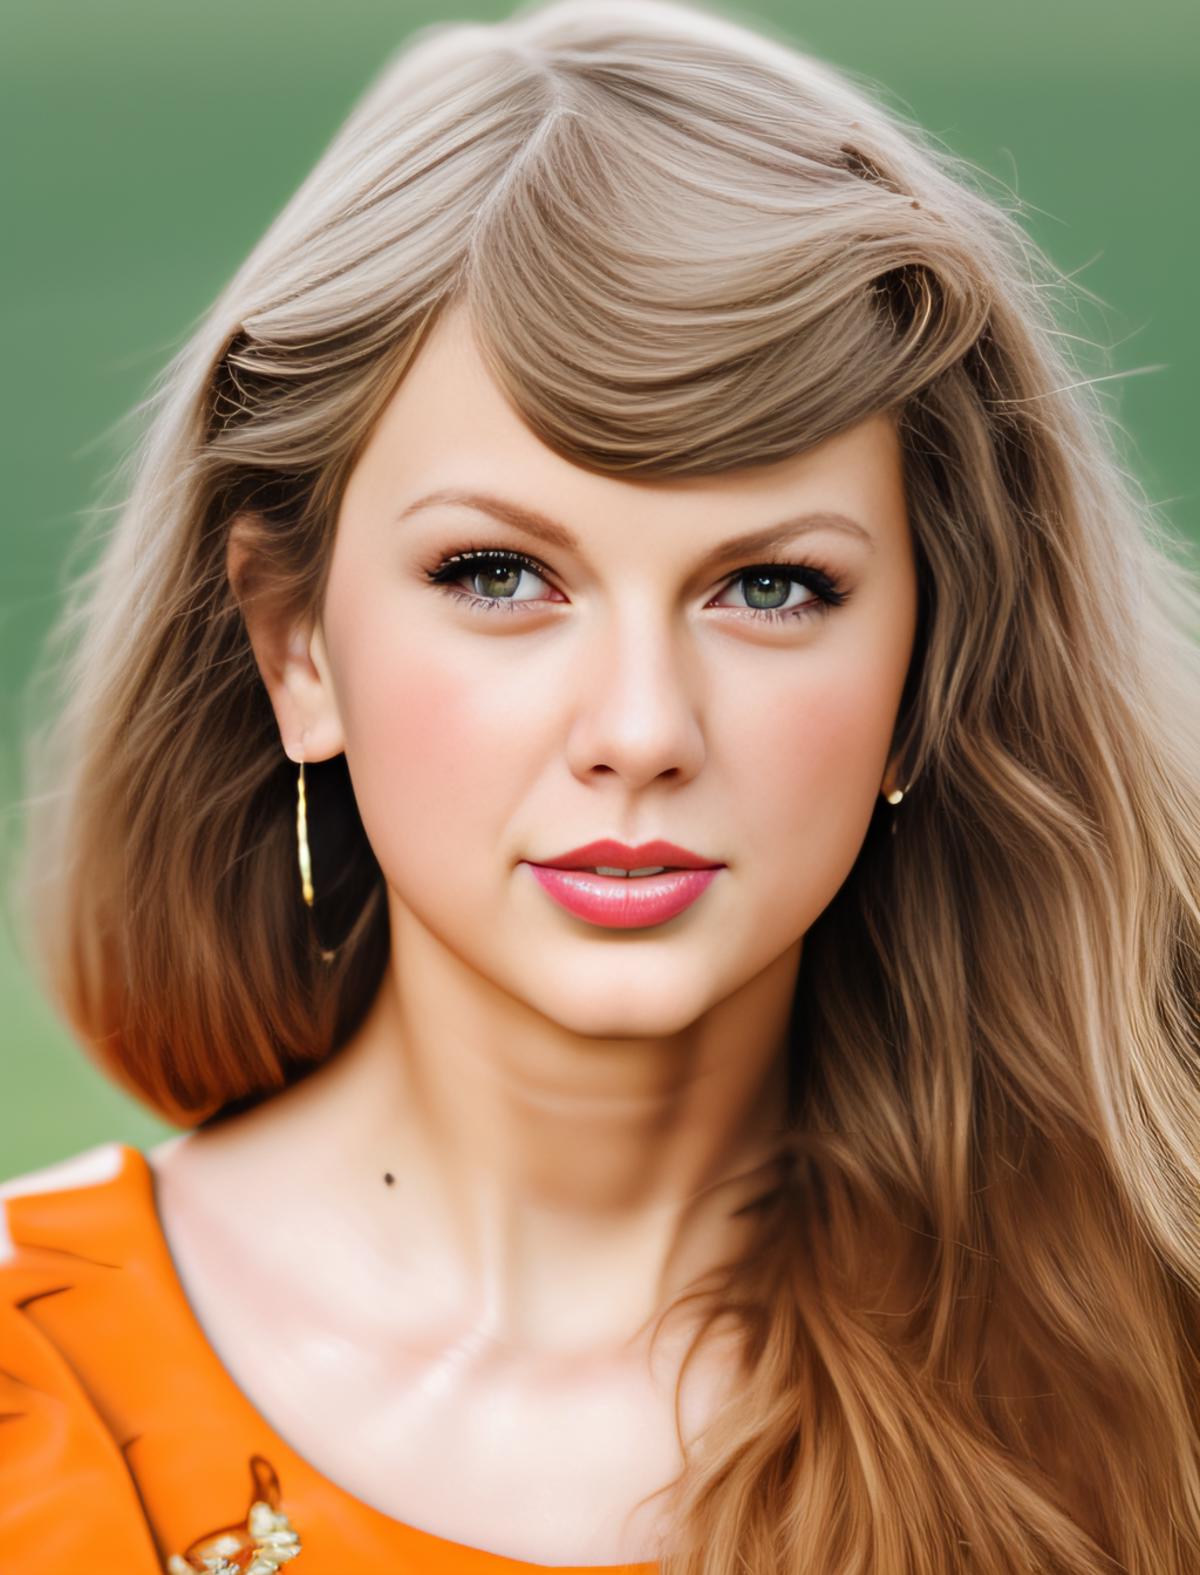 Taylor Swift image by parar20